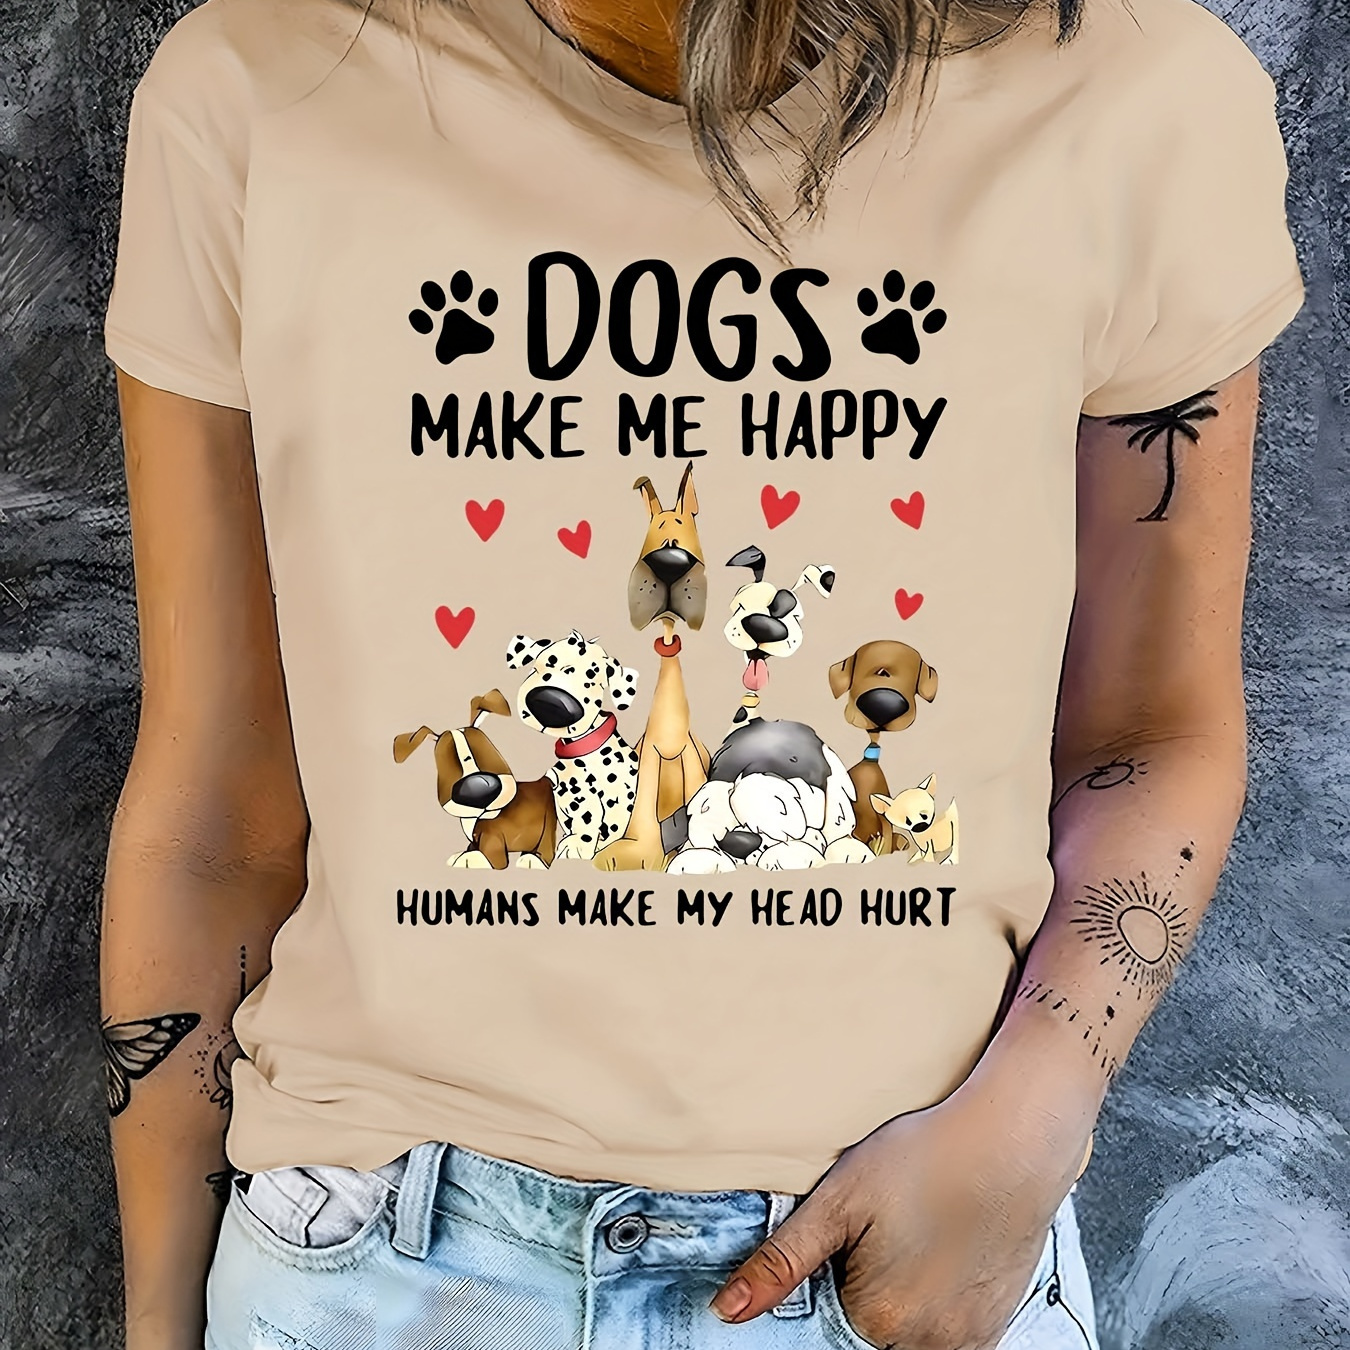 

Dogs & Letter Print T-shirt, Short Sleeve Crew Neck Casual Top For Summer & Spring, Women's Clothing